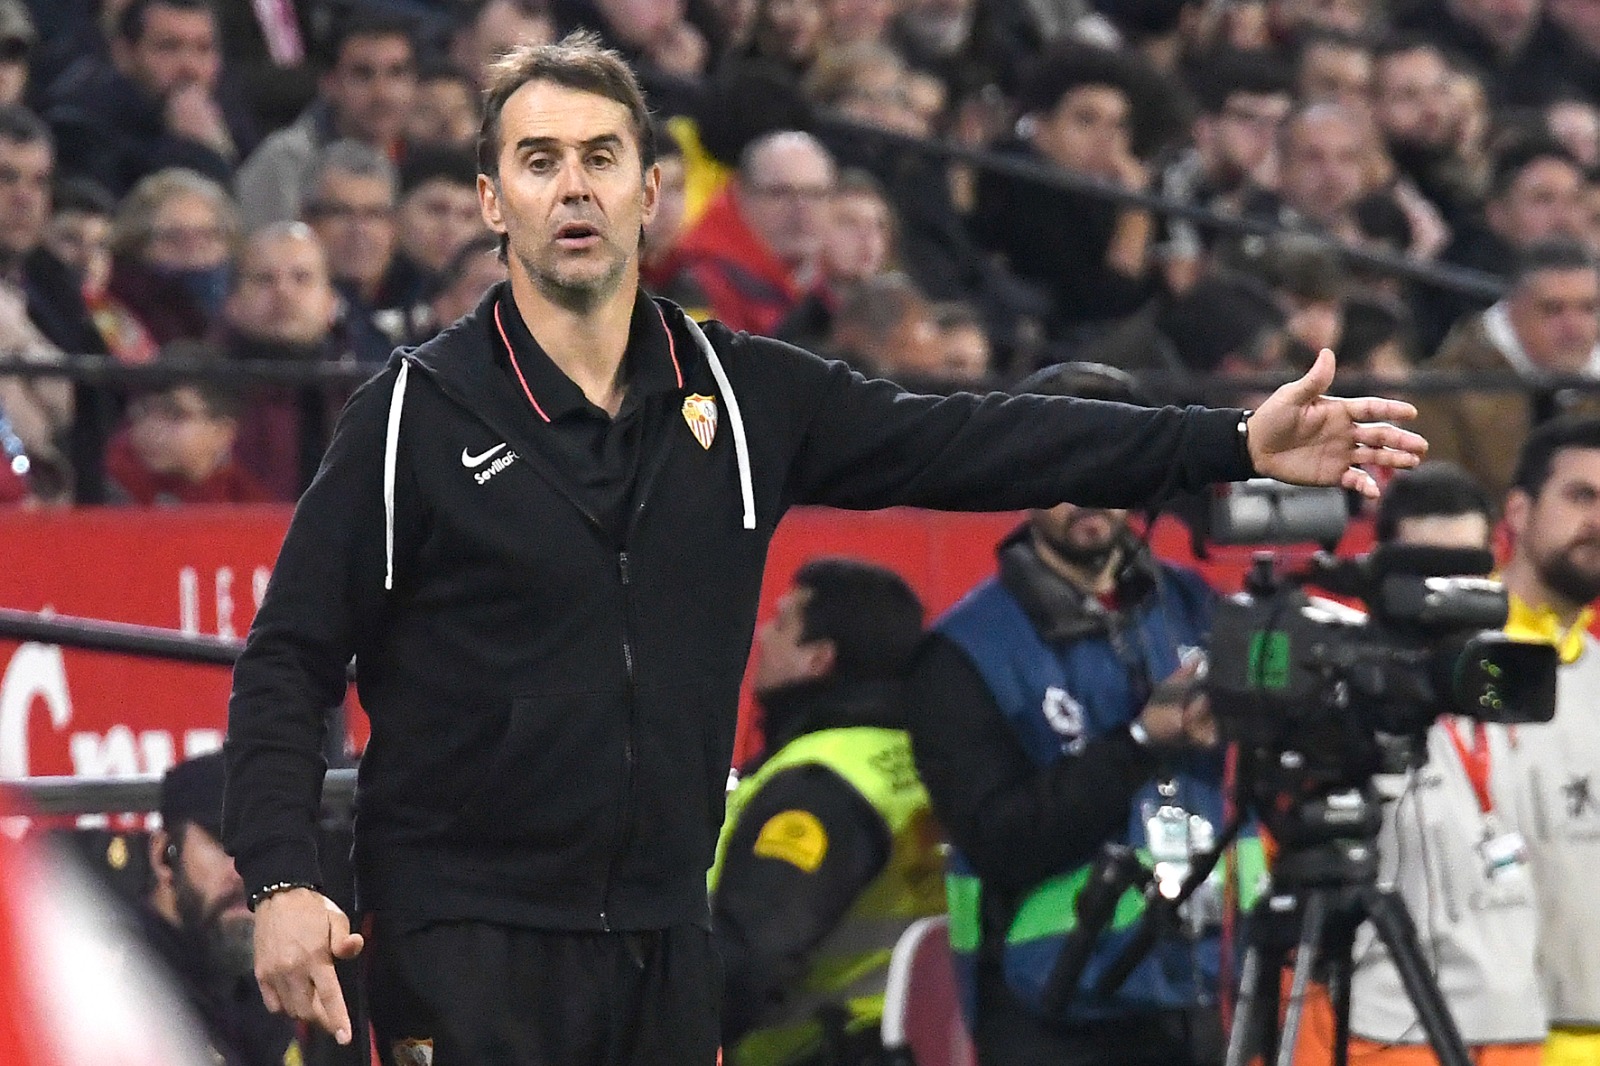 Lopetegui giving out his instructions on the sideline at the Sánchez-Pizjuán